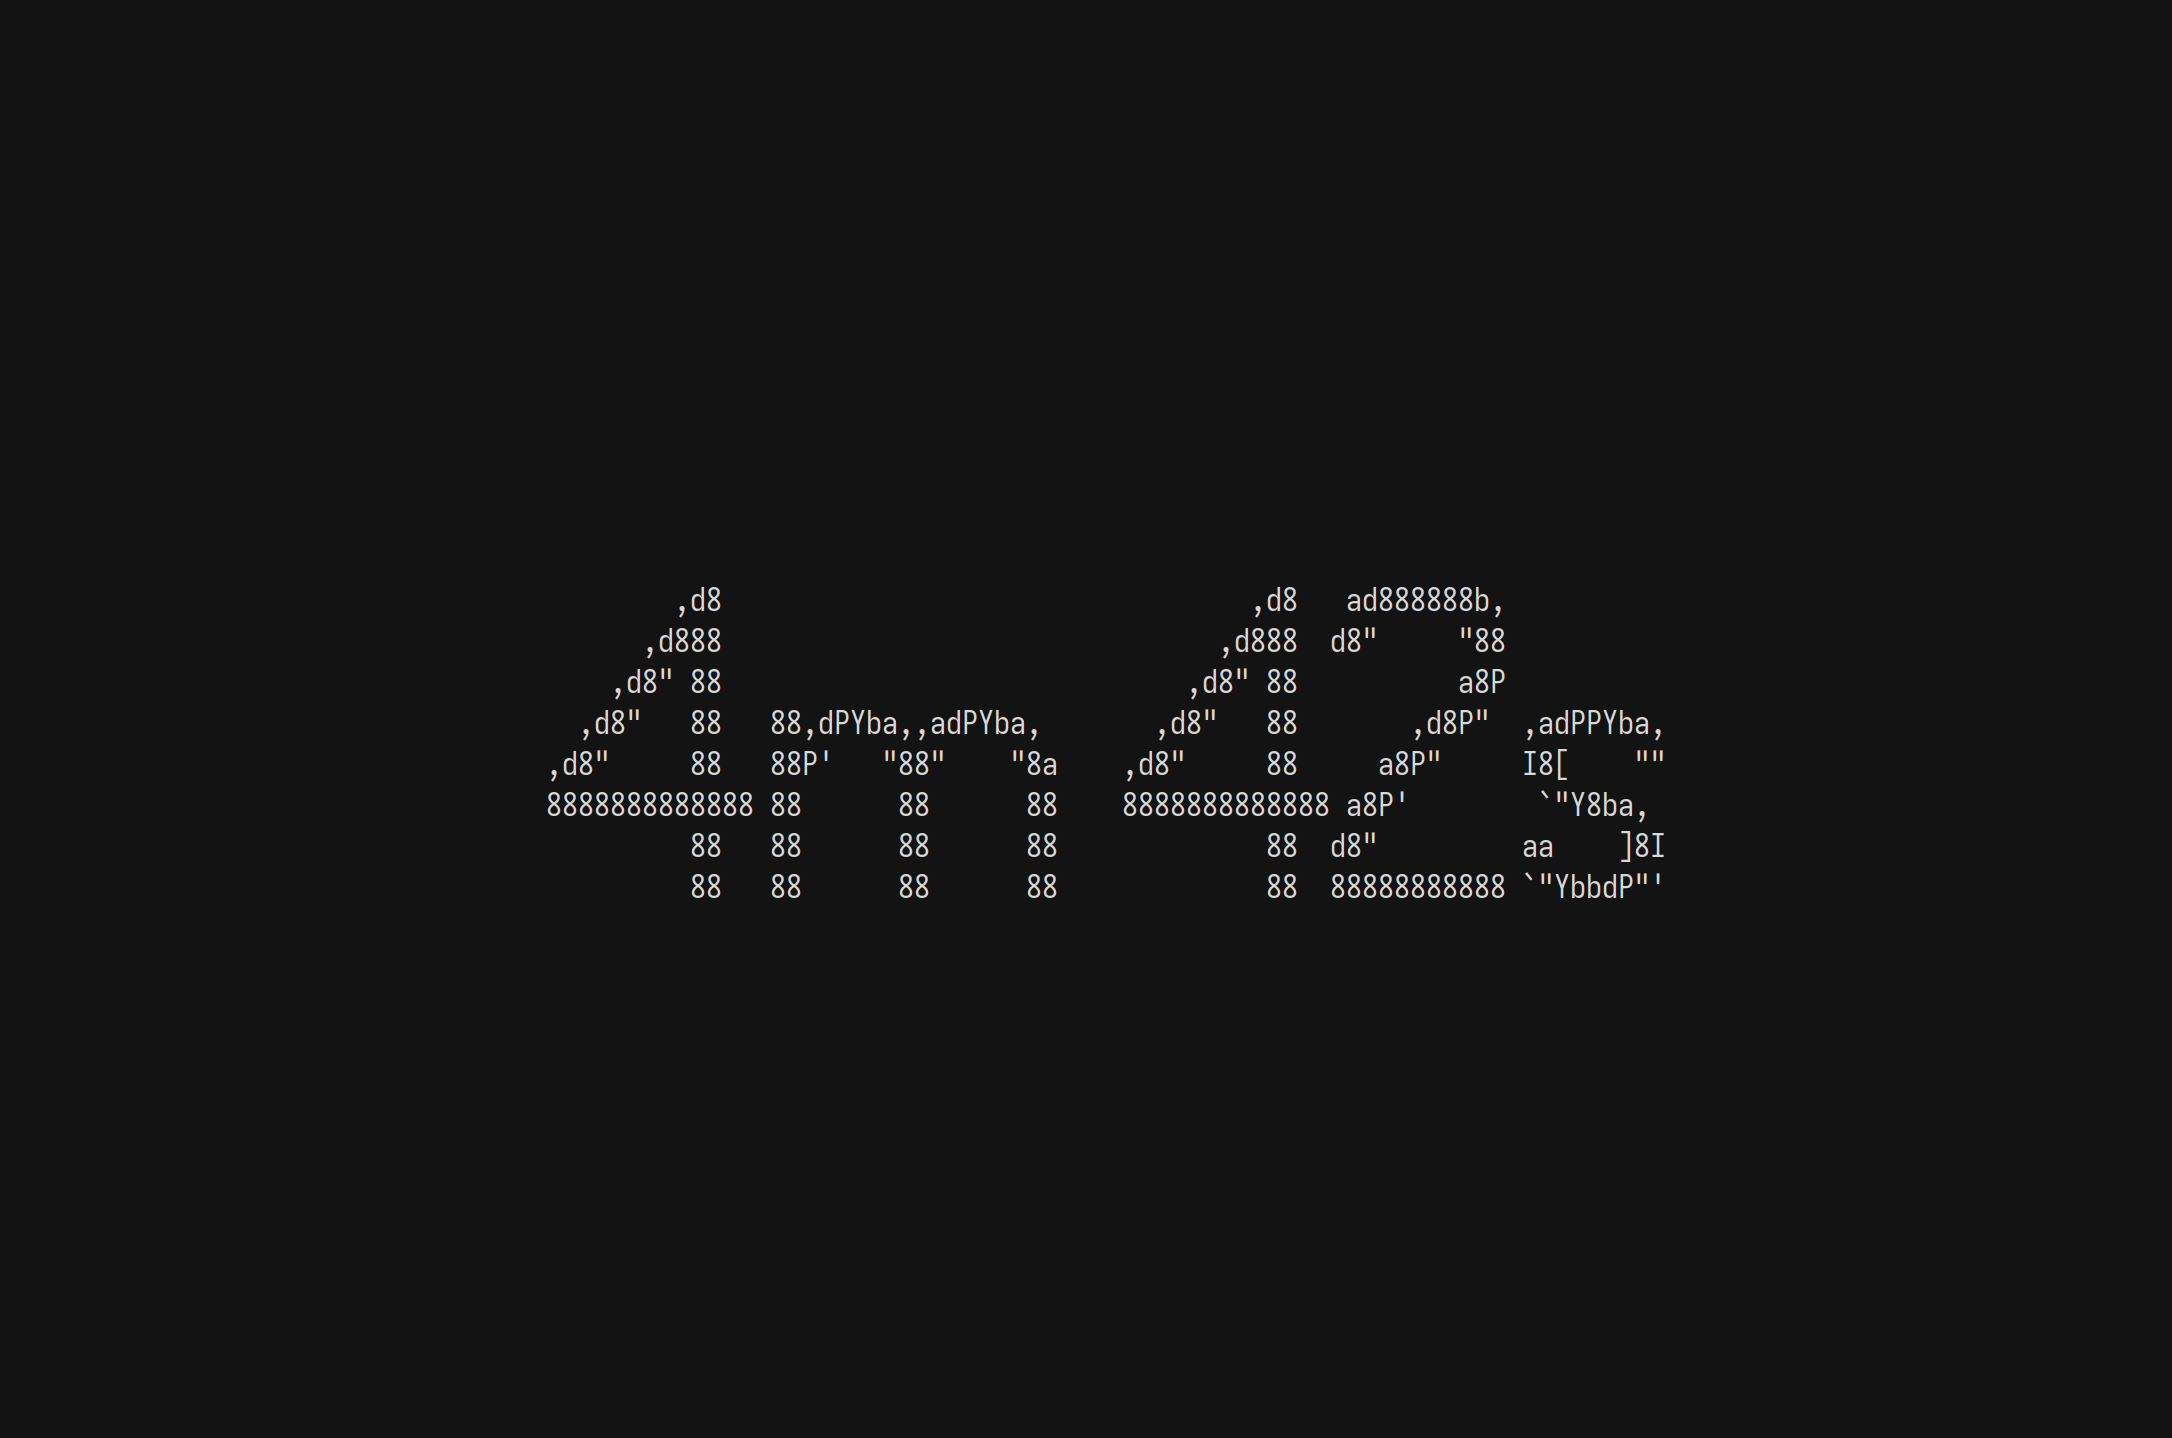 Time remaining smoothly rendered in ASCII characters. It reads '4m 42s'